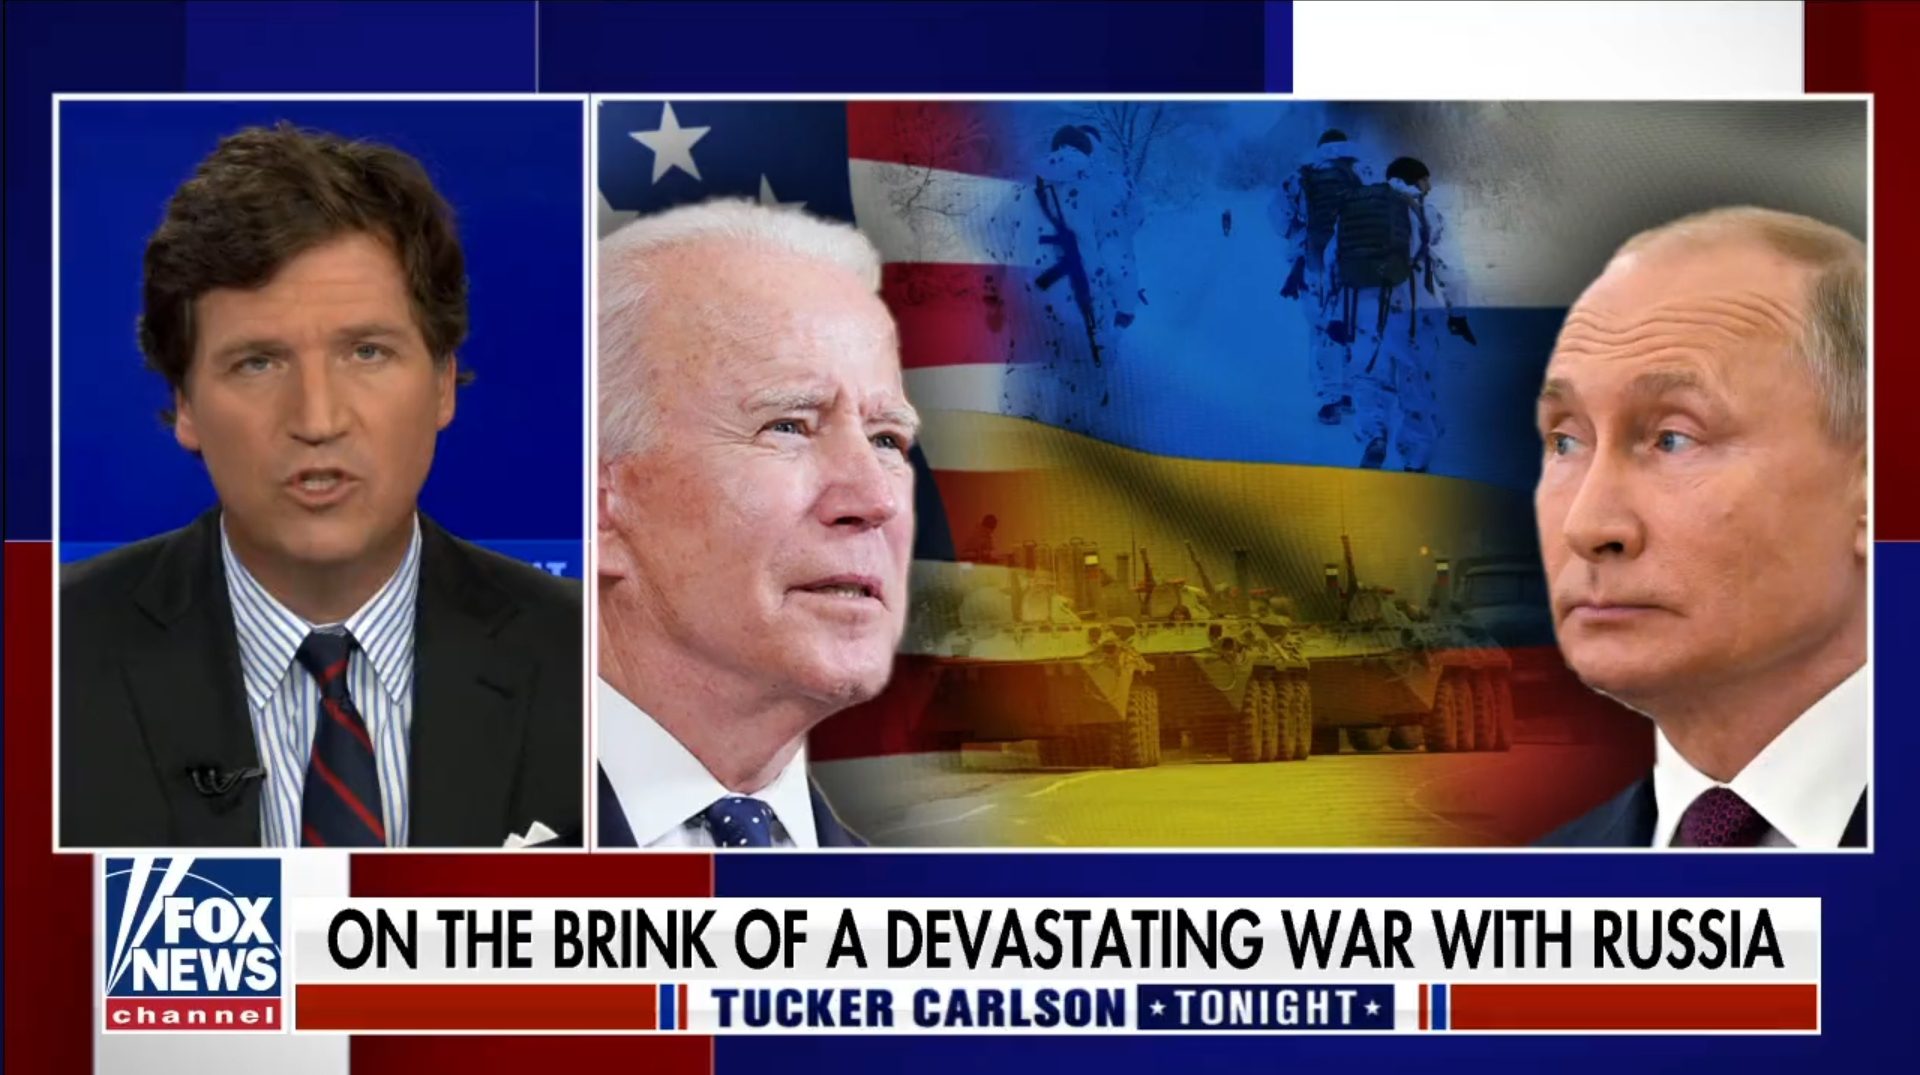 VIDEO: Guest on Tucker Carlson Sounds The Alarm Over Biden “Sleepwalking” the US to War With Russia – “It’s Not Just Nuts It’s Dangerous” – We’re “On the Precipice” Of Conflict Unseen Since WWII